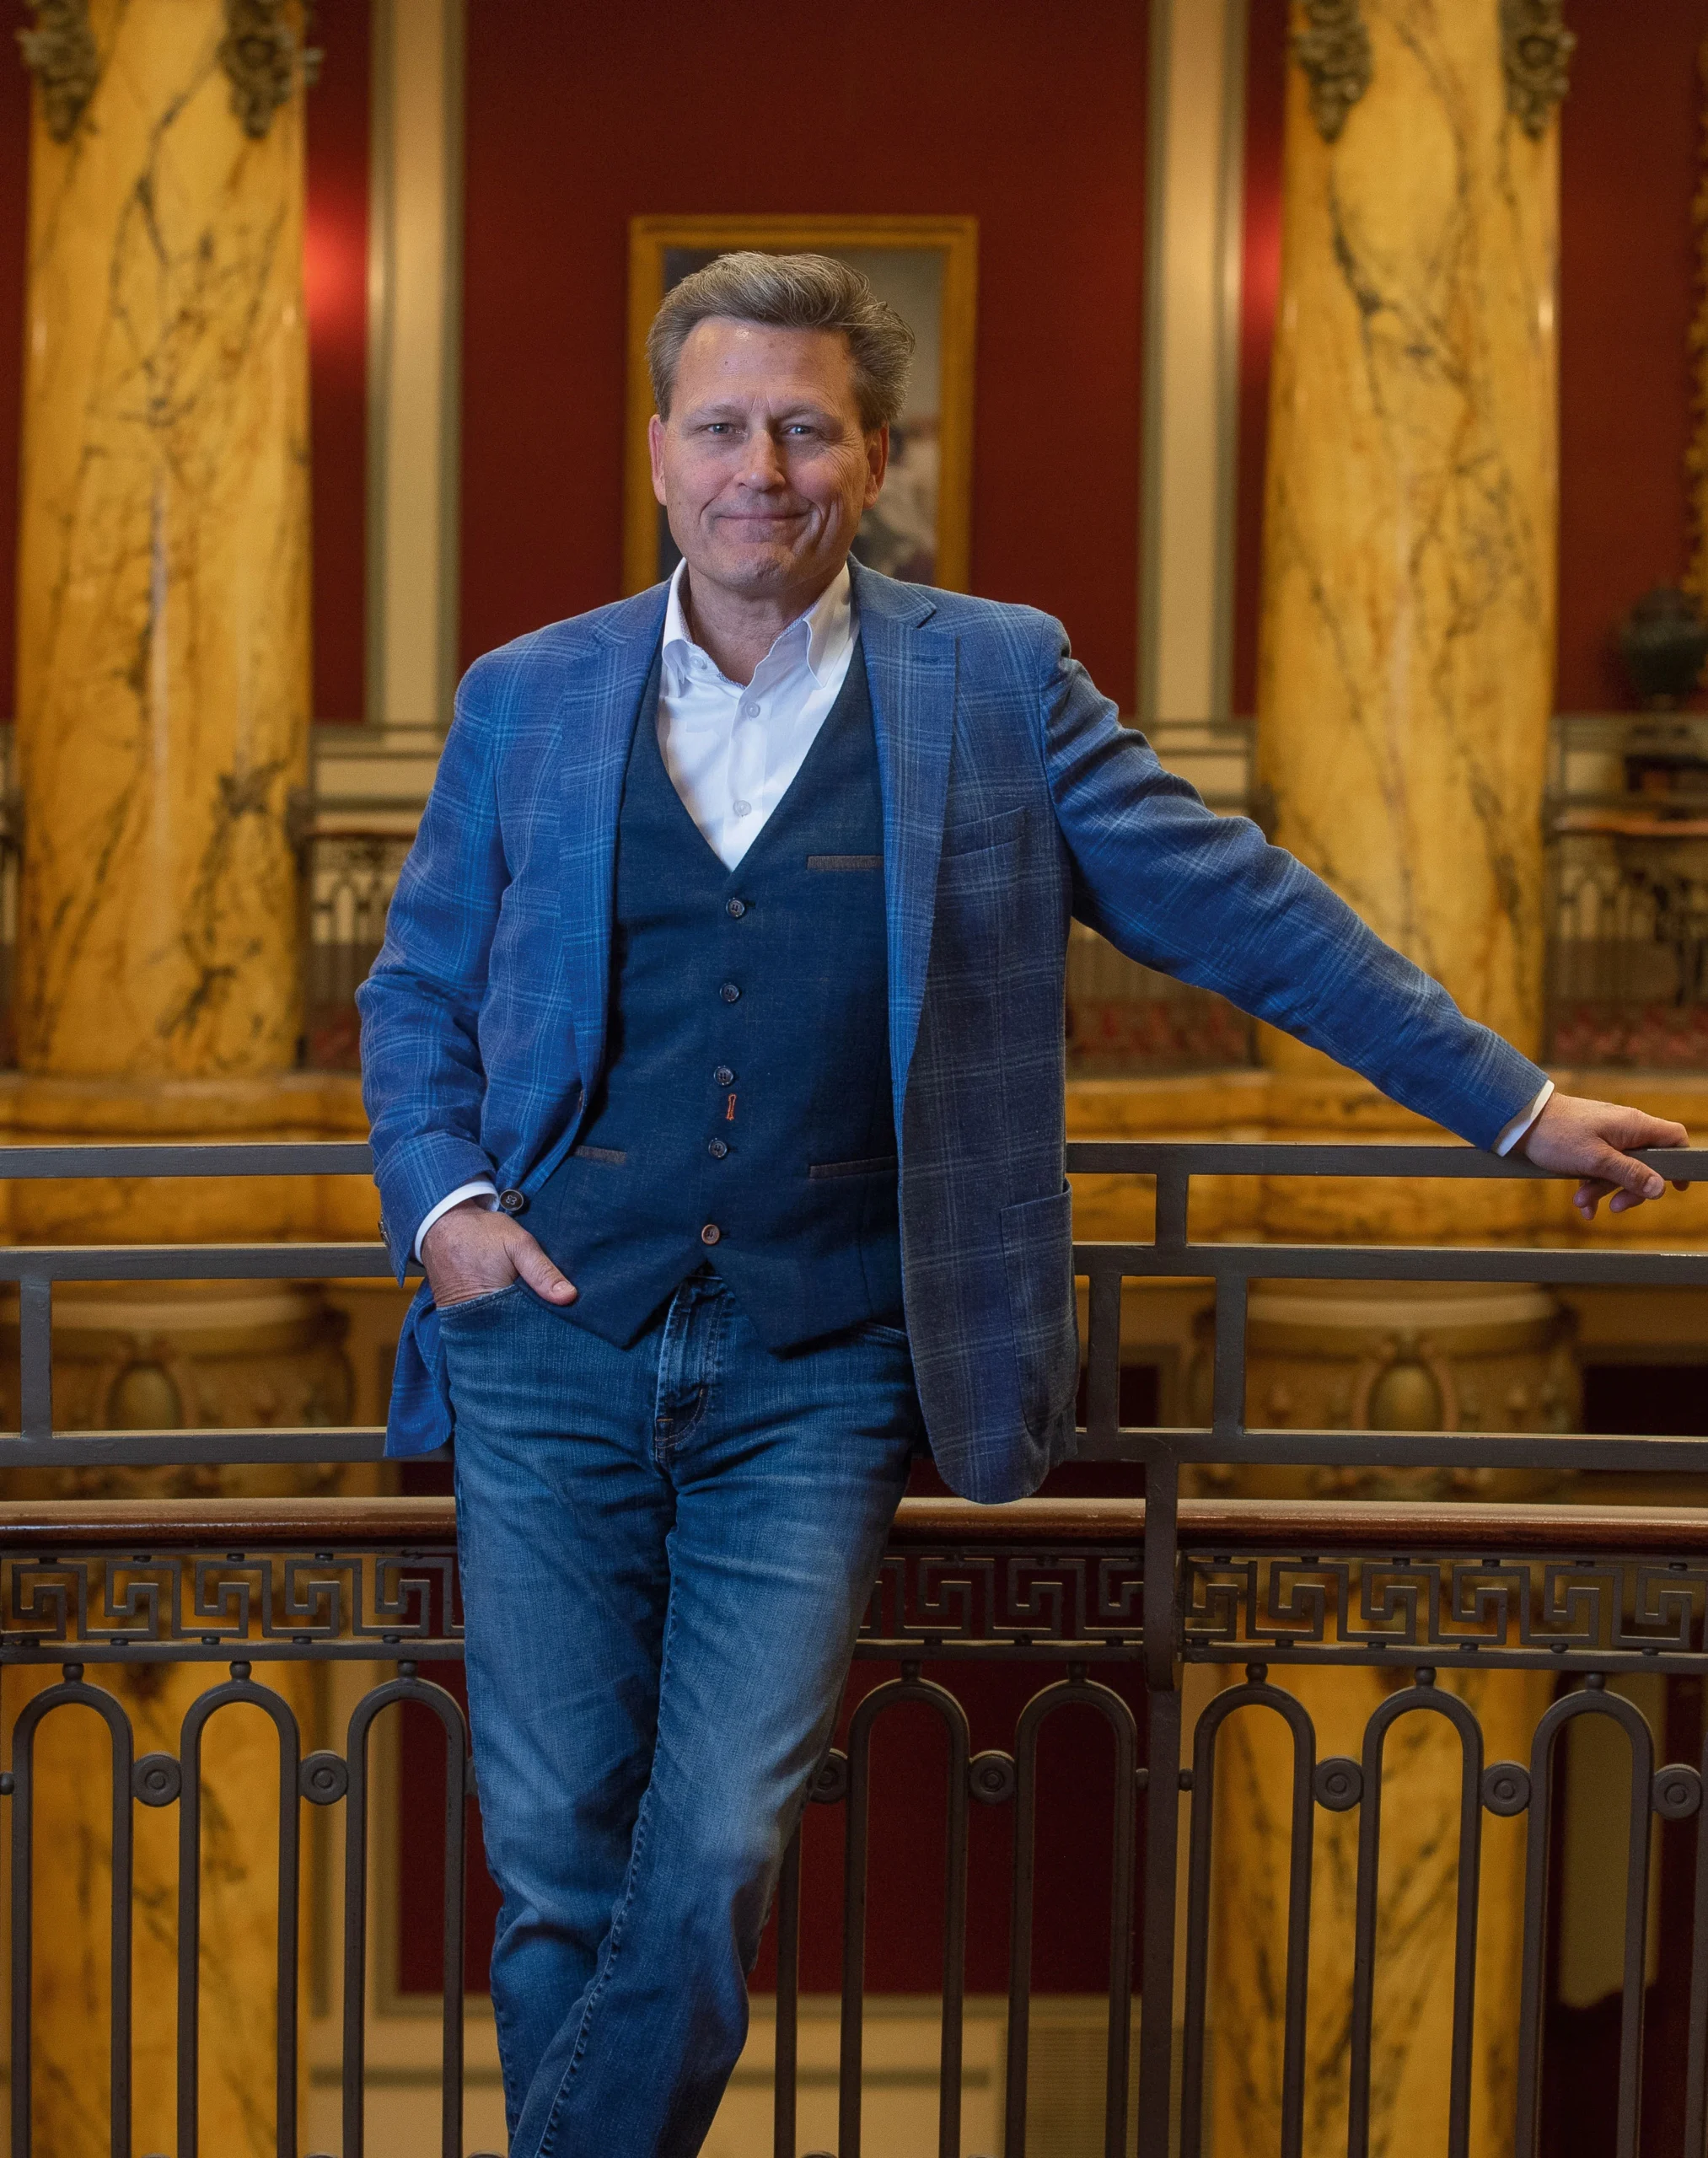 AN EVENING WITH BEST-SELLING AUTHOR DAVID BALDACCI